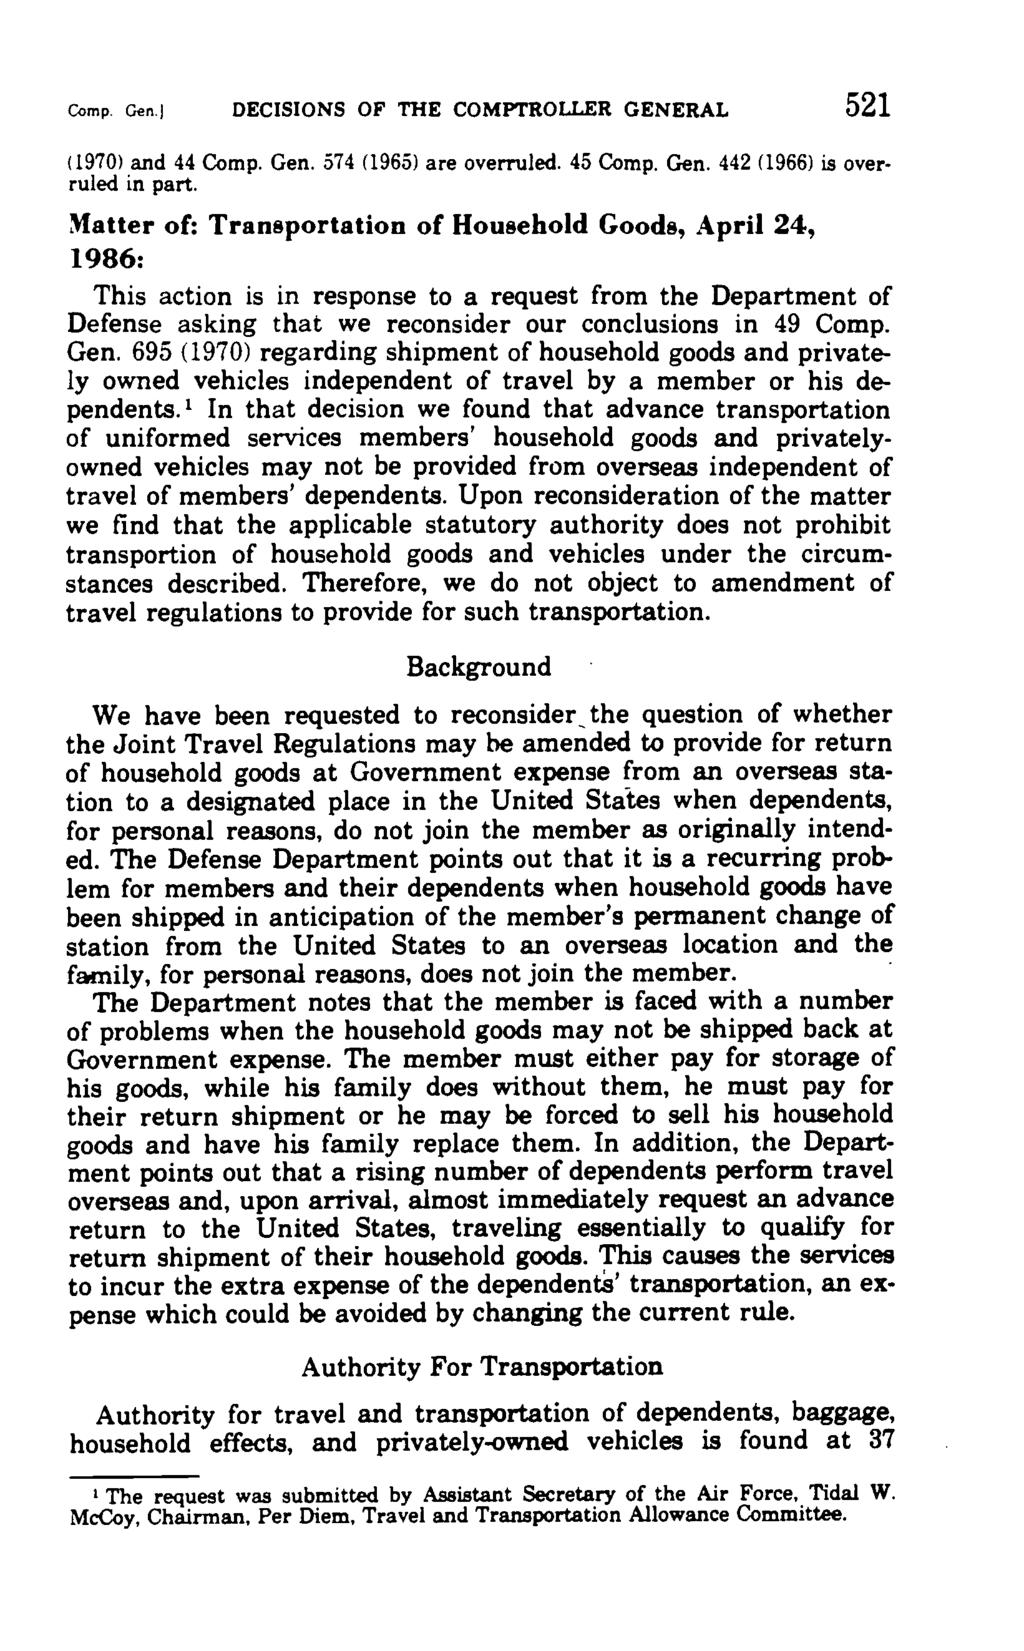 Comp. Gen.) DECISIONS OF THE COMPTROLLER GENERAL 521 (1970) and 44 Comp. Gen. 574 (1965) are overruled. 45 Comp. Gen. 442 (1966) is overruled in part.